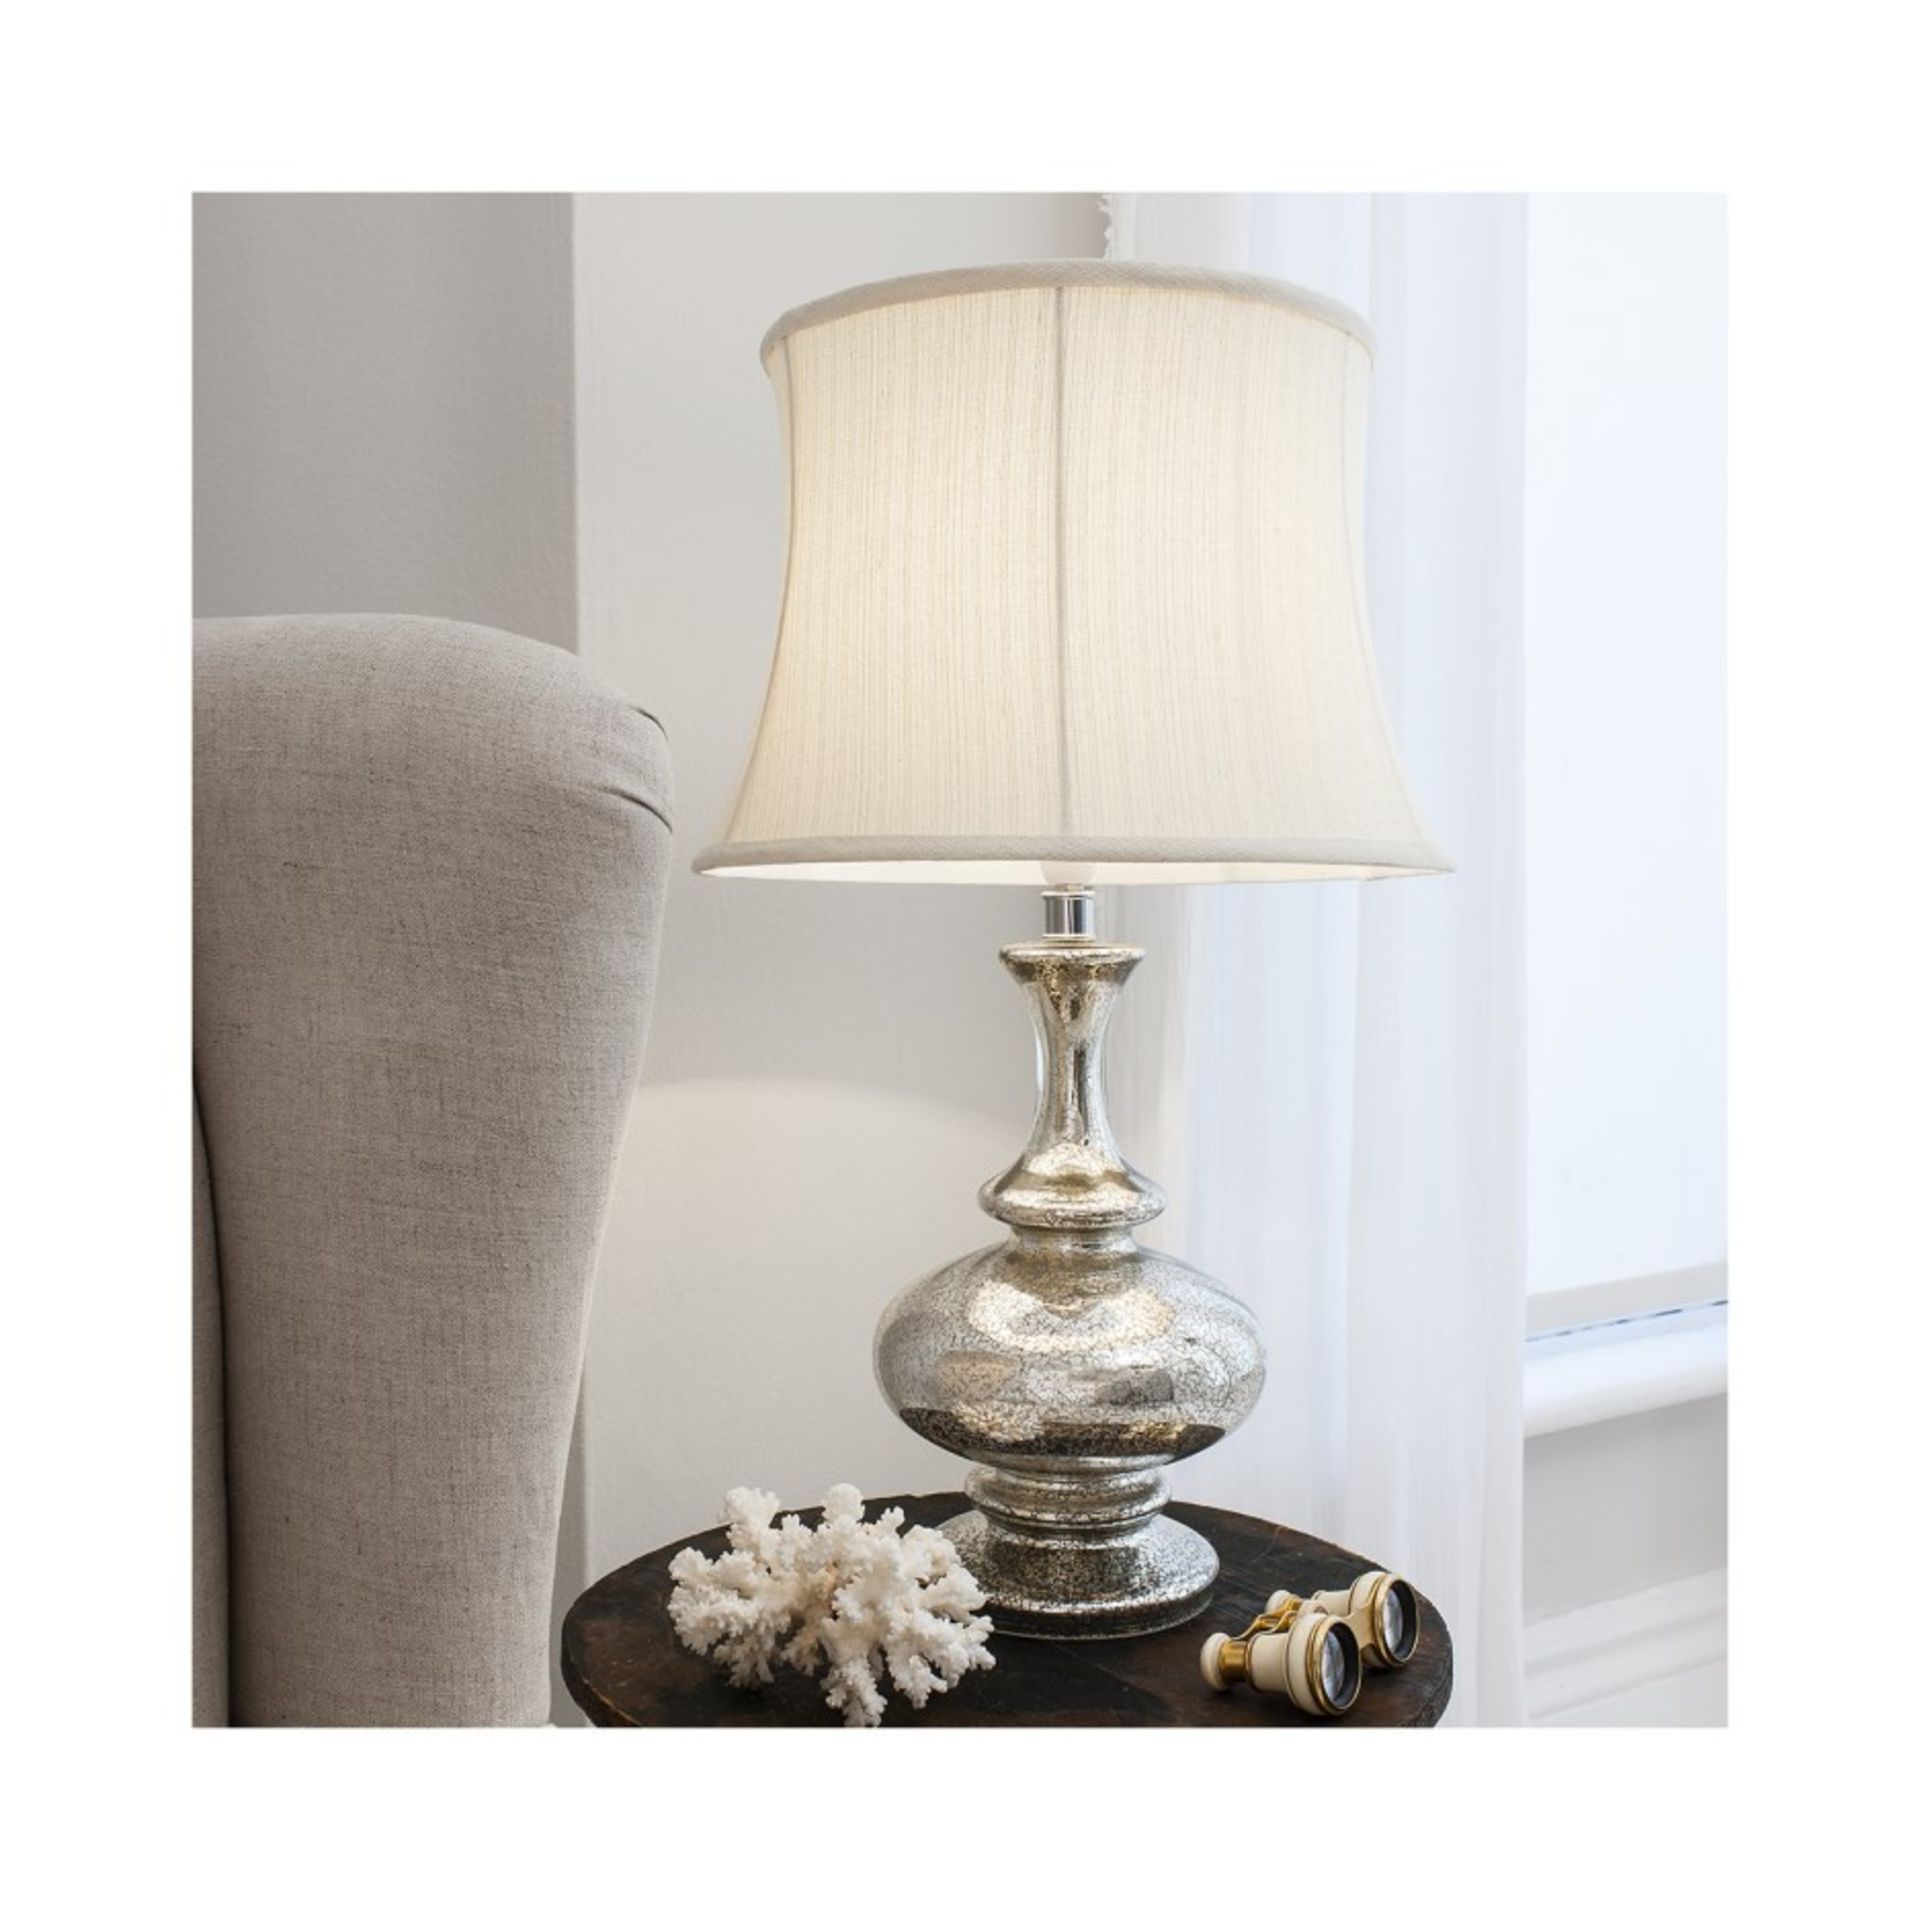 Miranese Table Lamp With it's wonderful gold speckled glass base and fluted cream drum shade, this